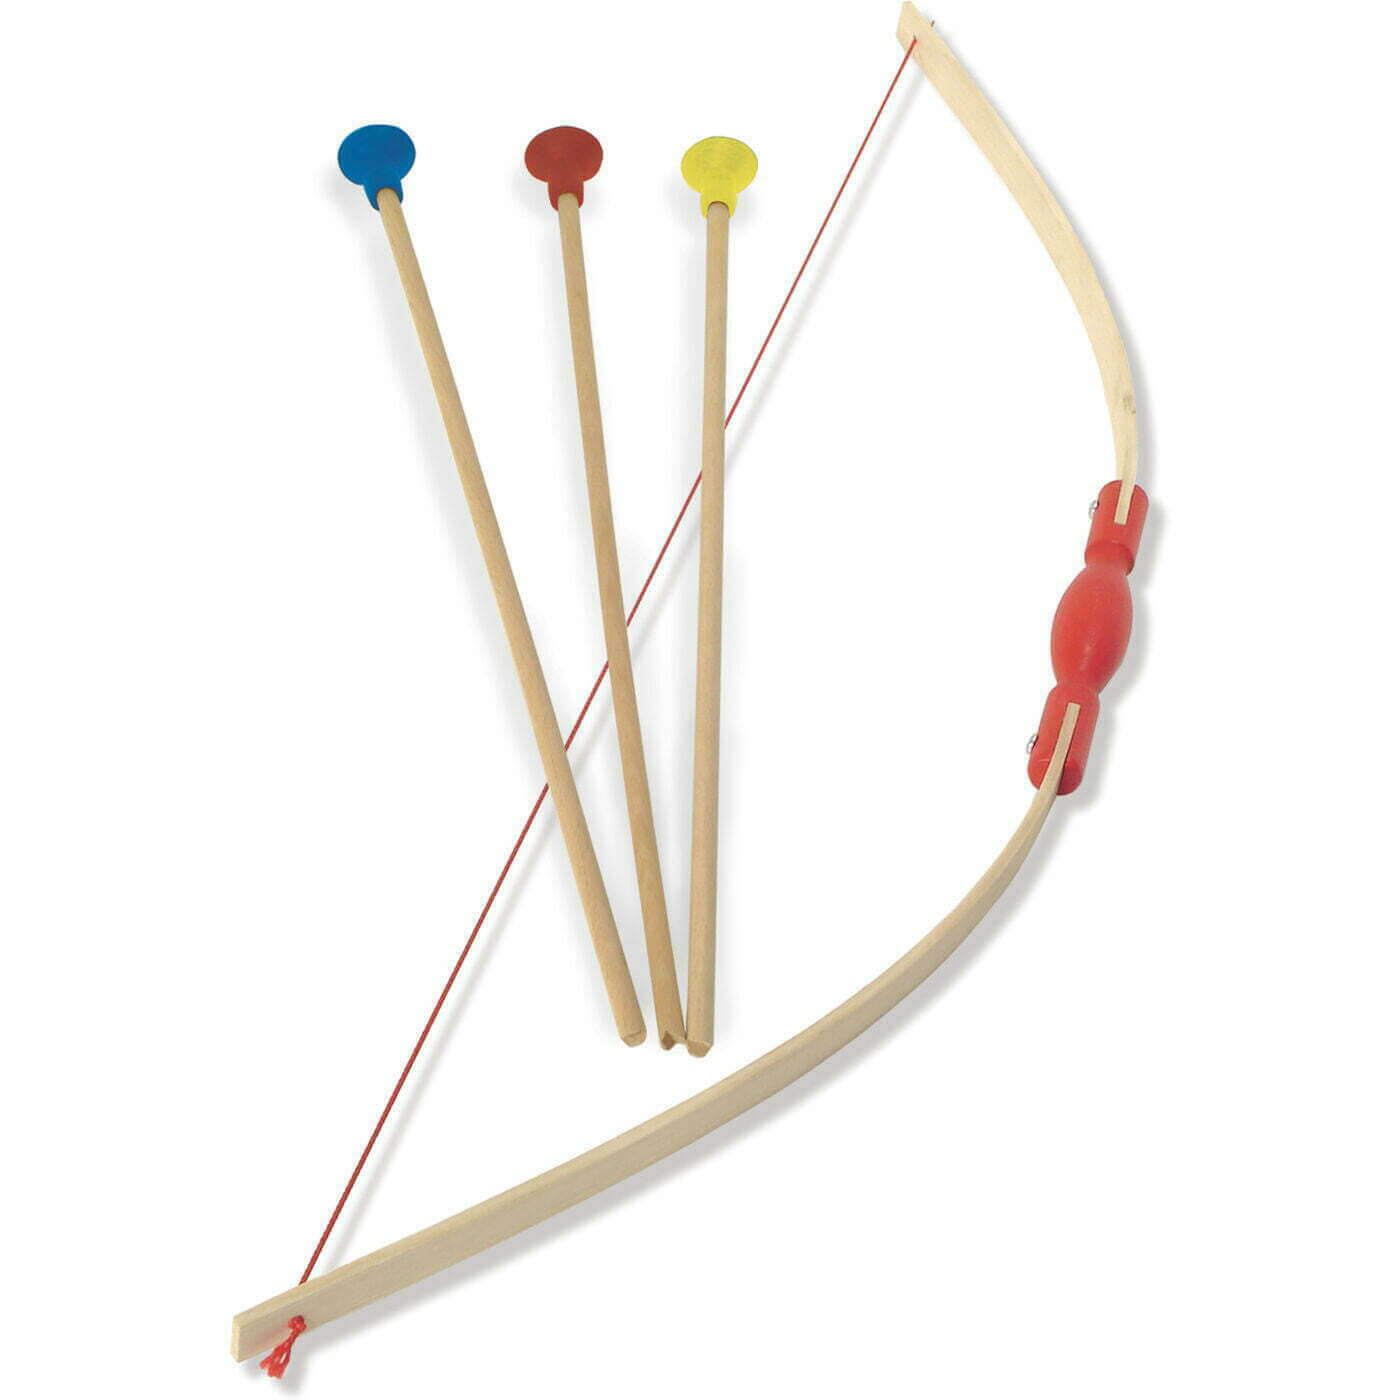 Wooden bow and arrow kit complete with a target for little ones wanting to try archery for the very first time.  The box comes with 3 arrows and a bow, with the box doubling as the target.